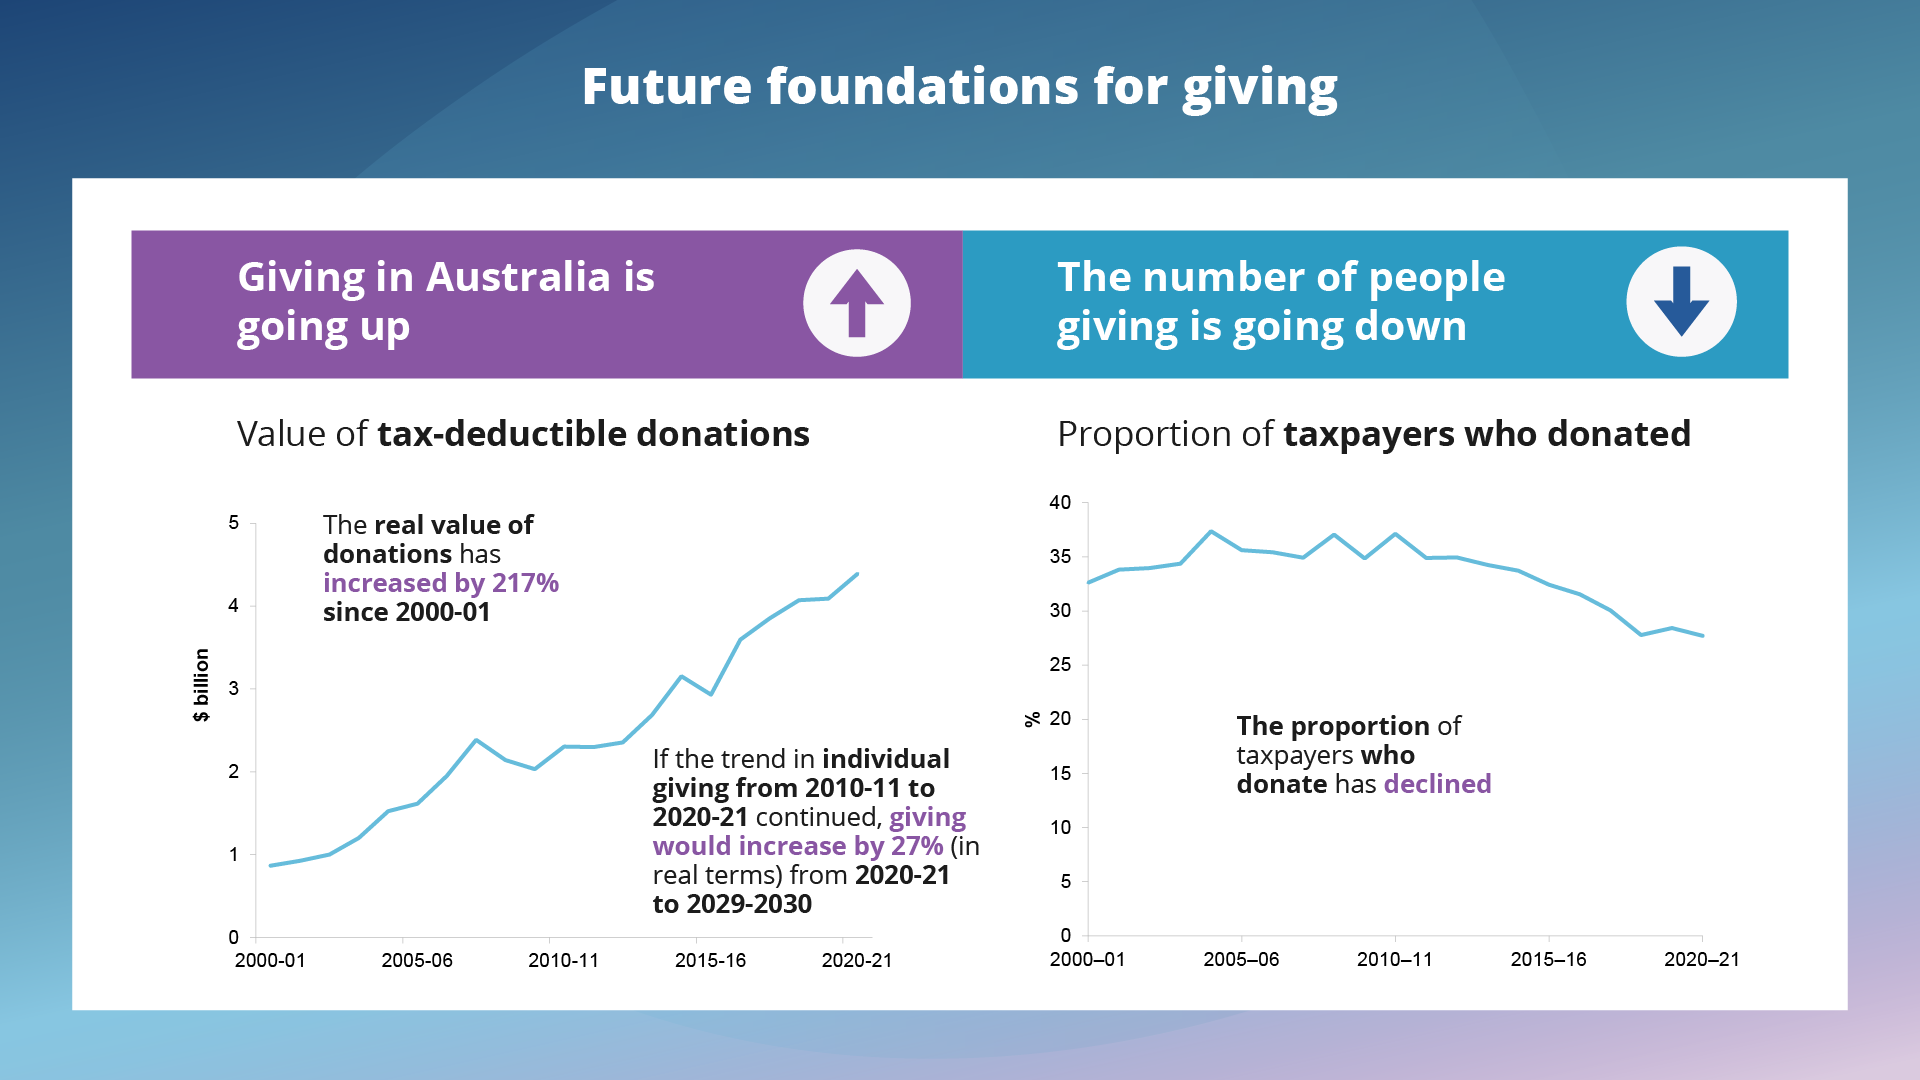 Giving in Australia is going up. The real value of donations has increased by 217% since 2000-01. If the trend in individual giving from 2010-11 to 2020-21 continued, giving would increase by 27% (in real terms) from 2020-21 to 2029-2030. The number of people giving is going down. Proportion of taxpayers who donated. The proportion of taxpayers who donate has declined.